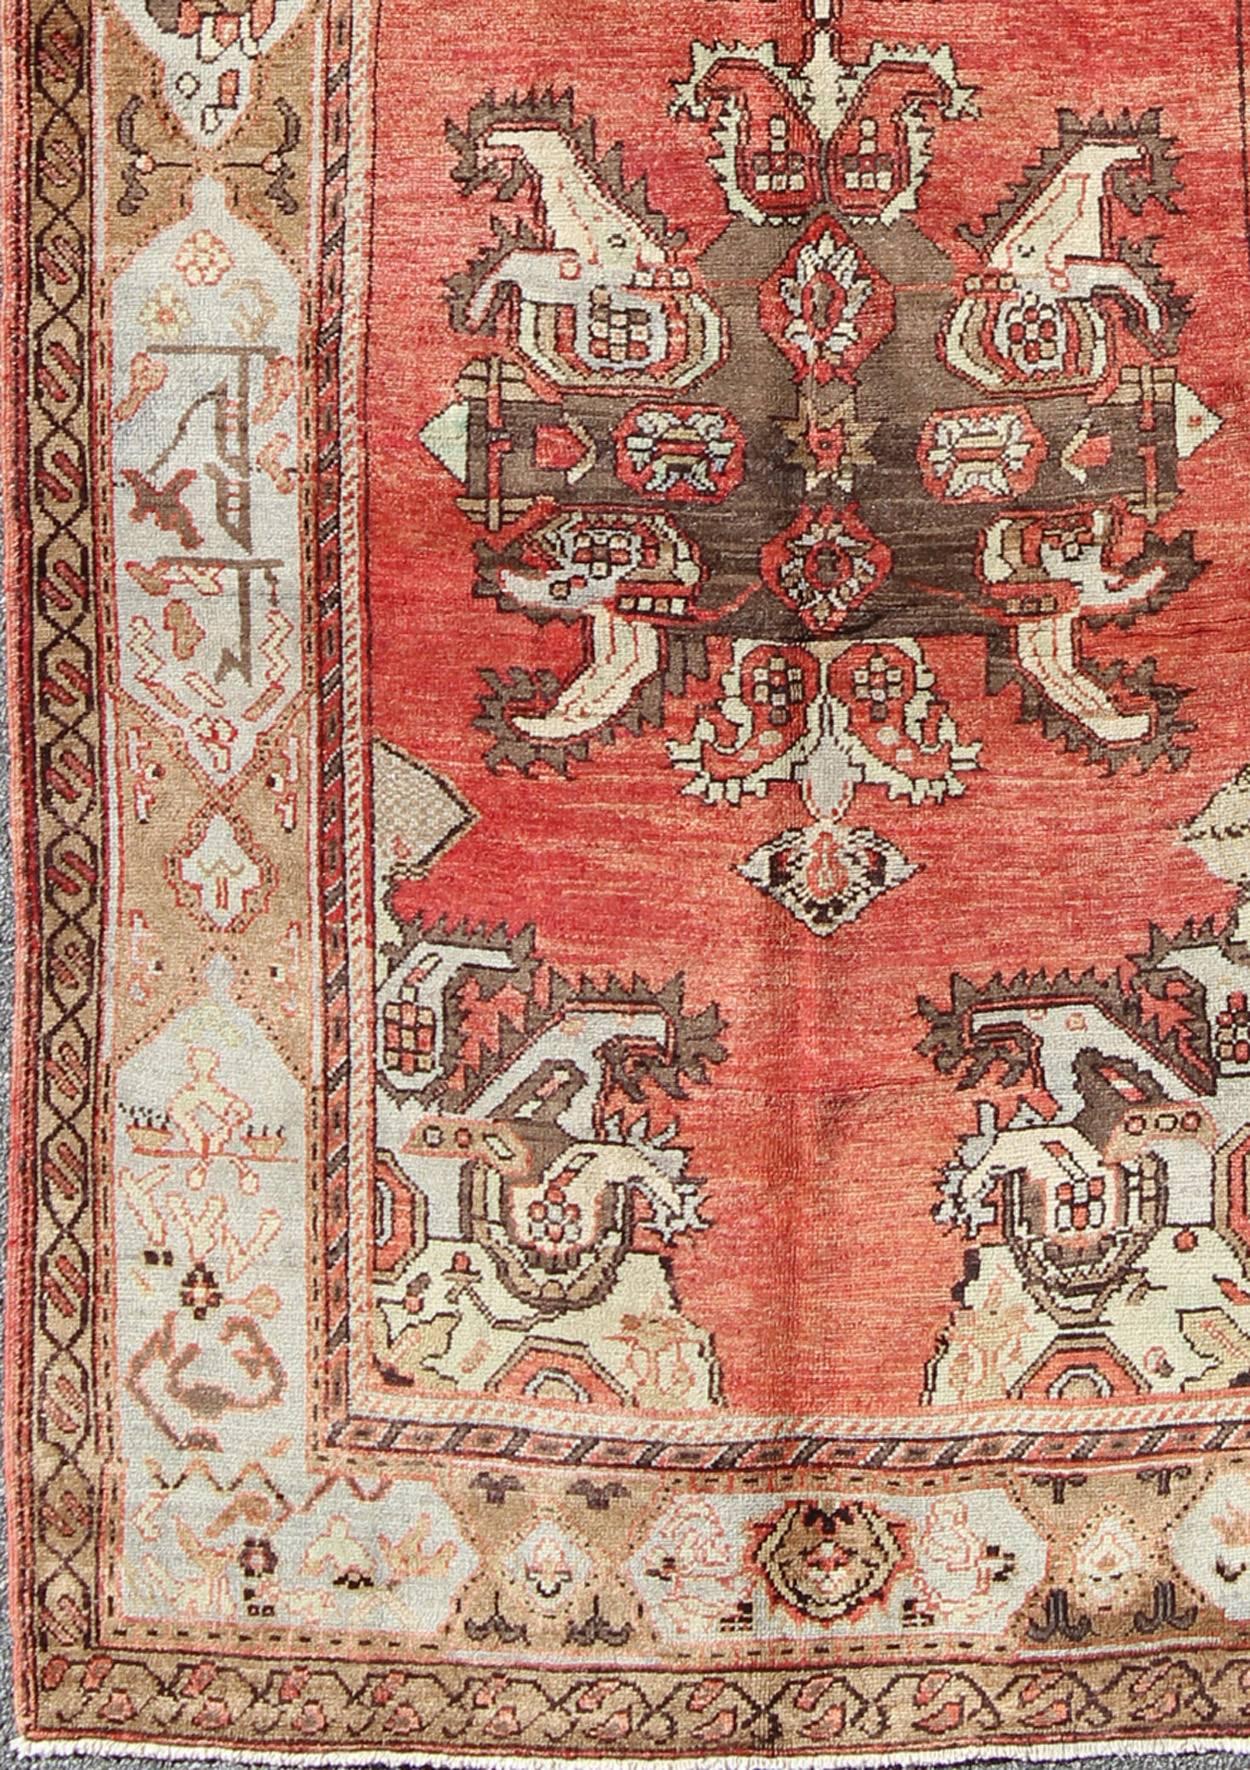 This softly colorful Oushak carpet rests beautifully upon a field of elegant light coral. Two large medallions of brown, taupe and gray take center stage and are well balanced by four prominent organic corner motifs composed of various muted gray